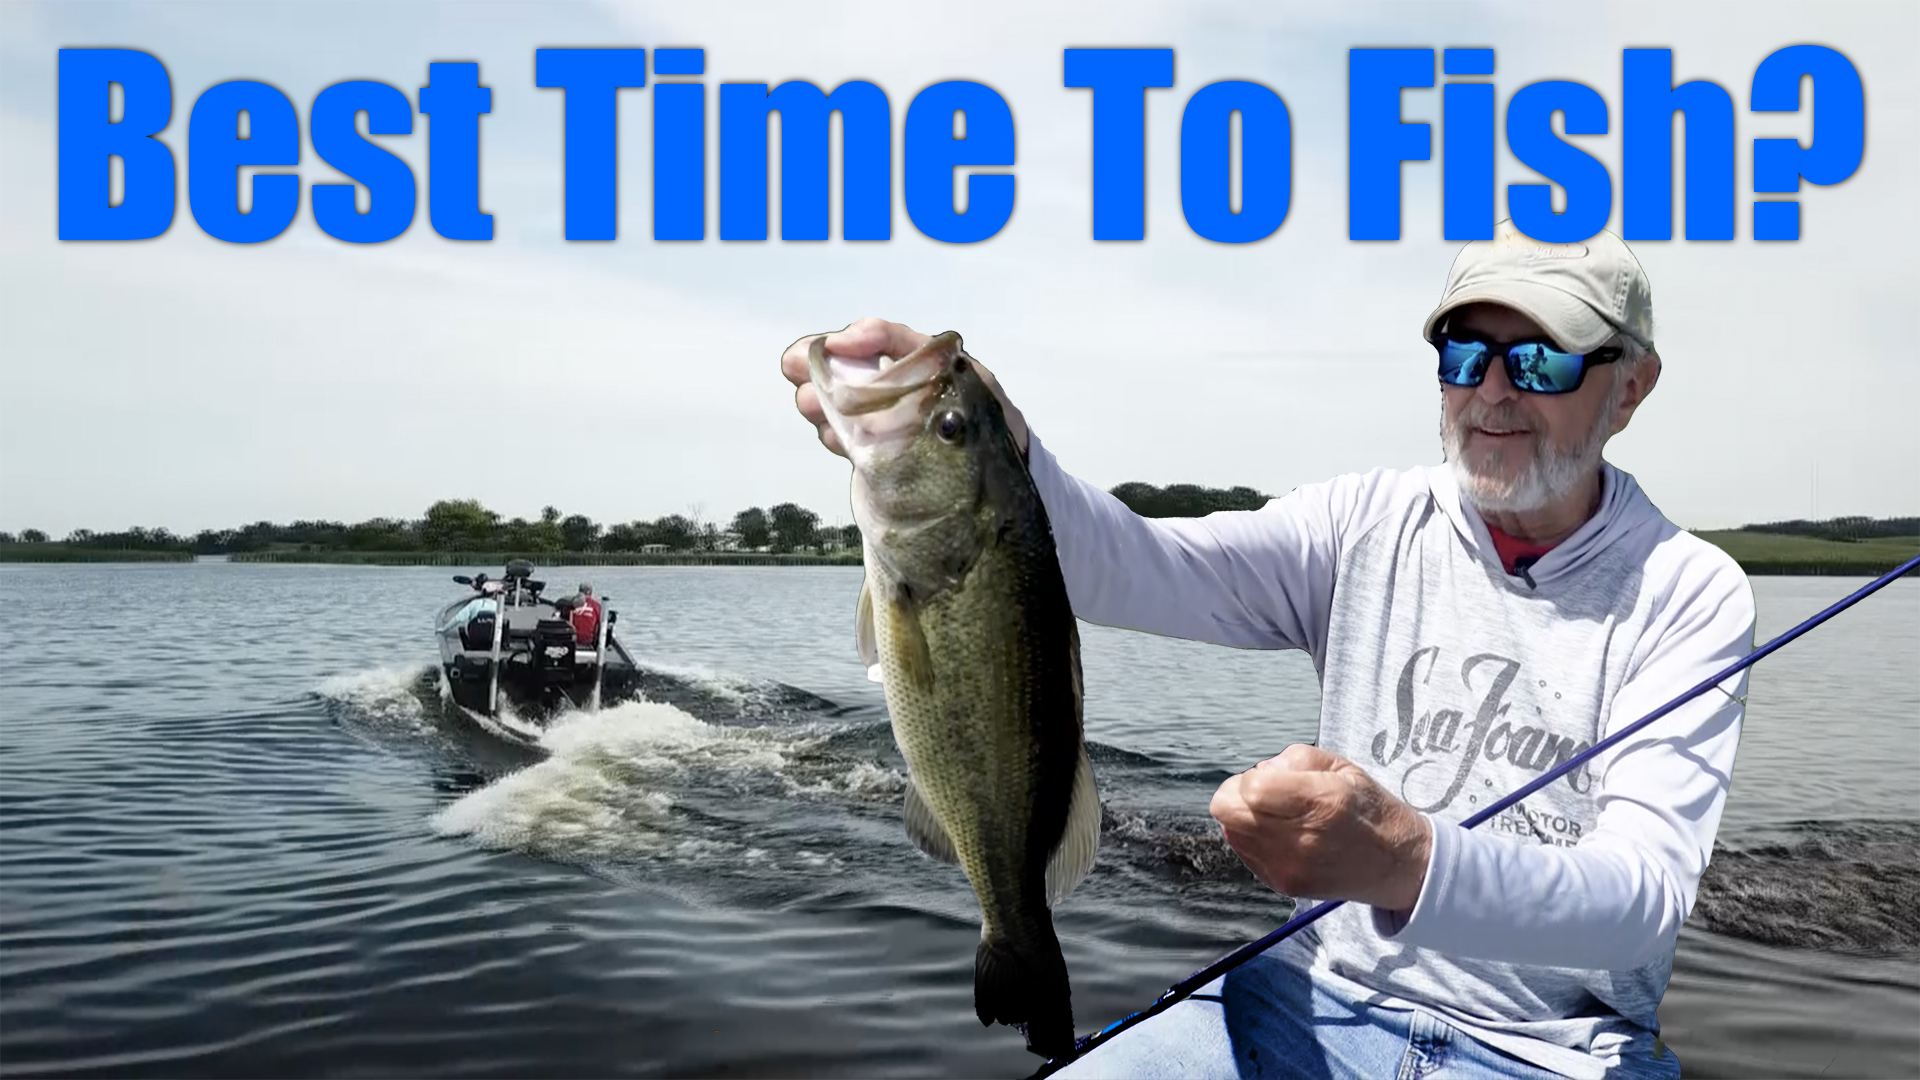 Maximizing Your Catch: Advanced Strategies from 'Best Time To Fish' Explained